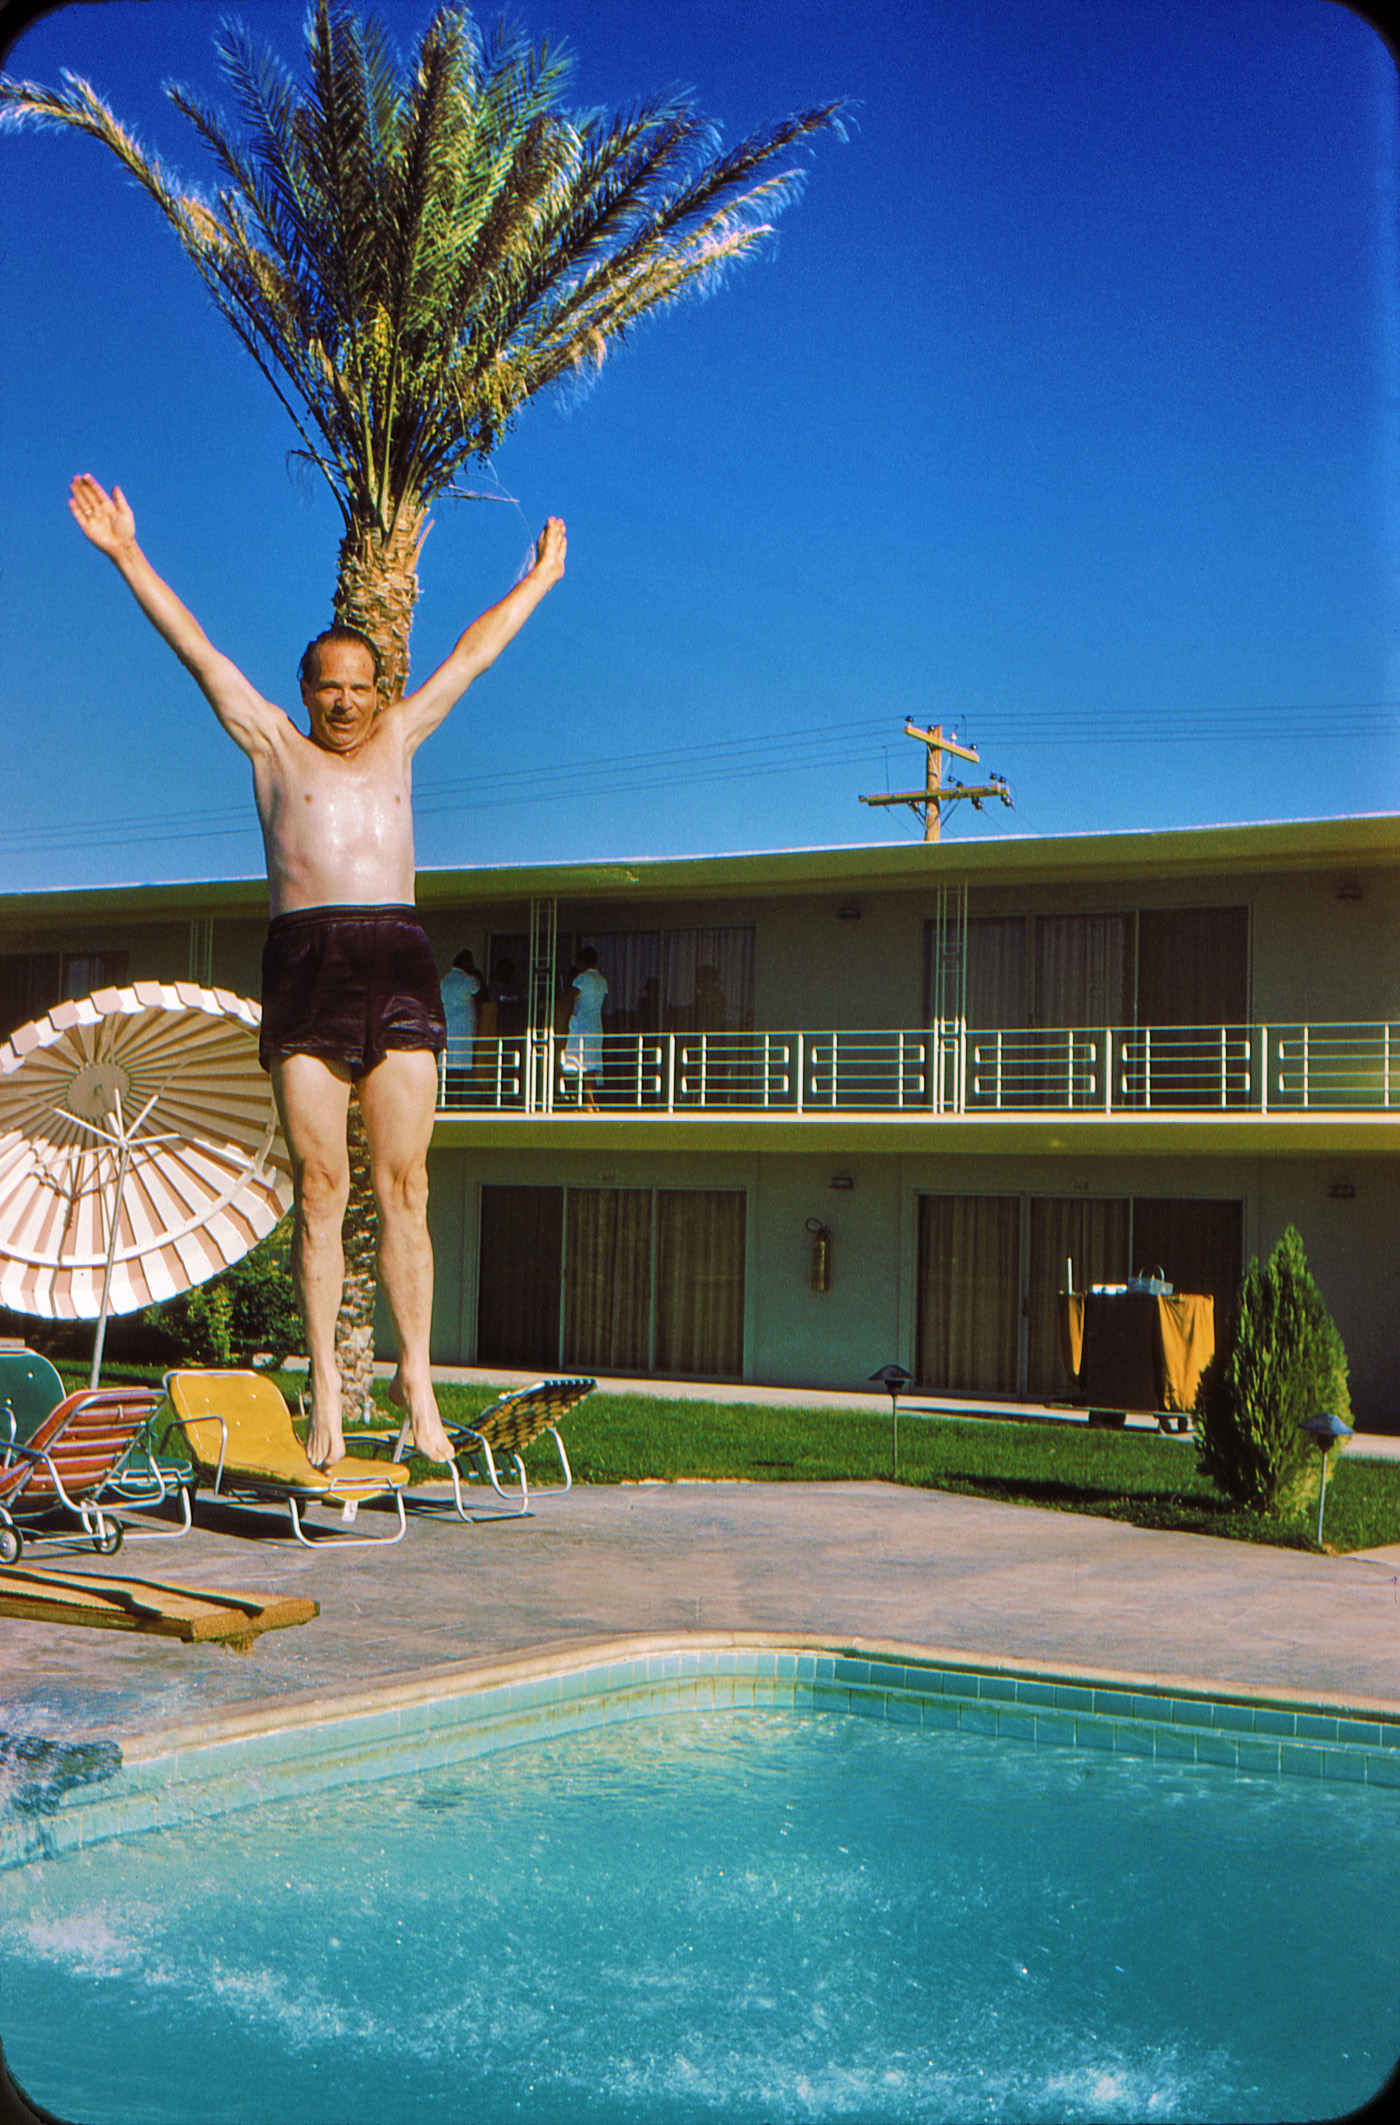 Mid-1950s. An unknown pool patron makes like a tree and jumps in to escape the heat in Las Vegas. Scanned from the Kodachrome slide. View full size